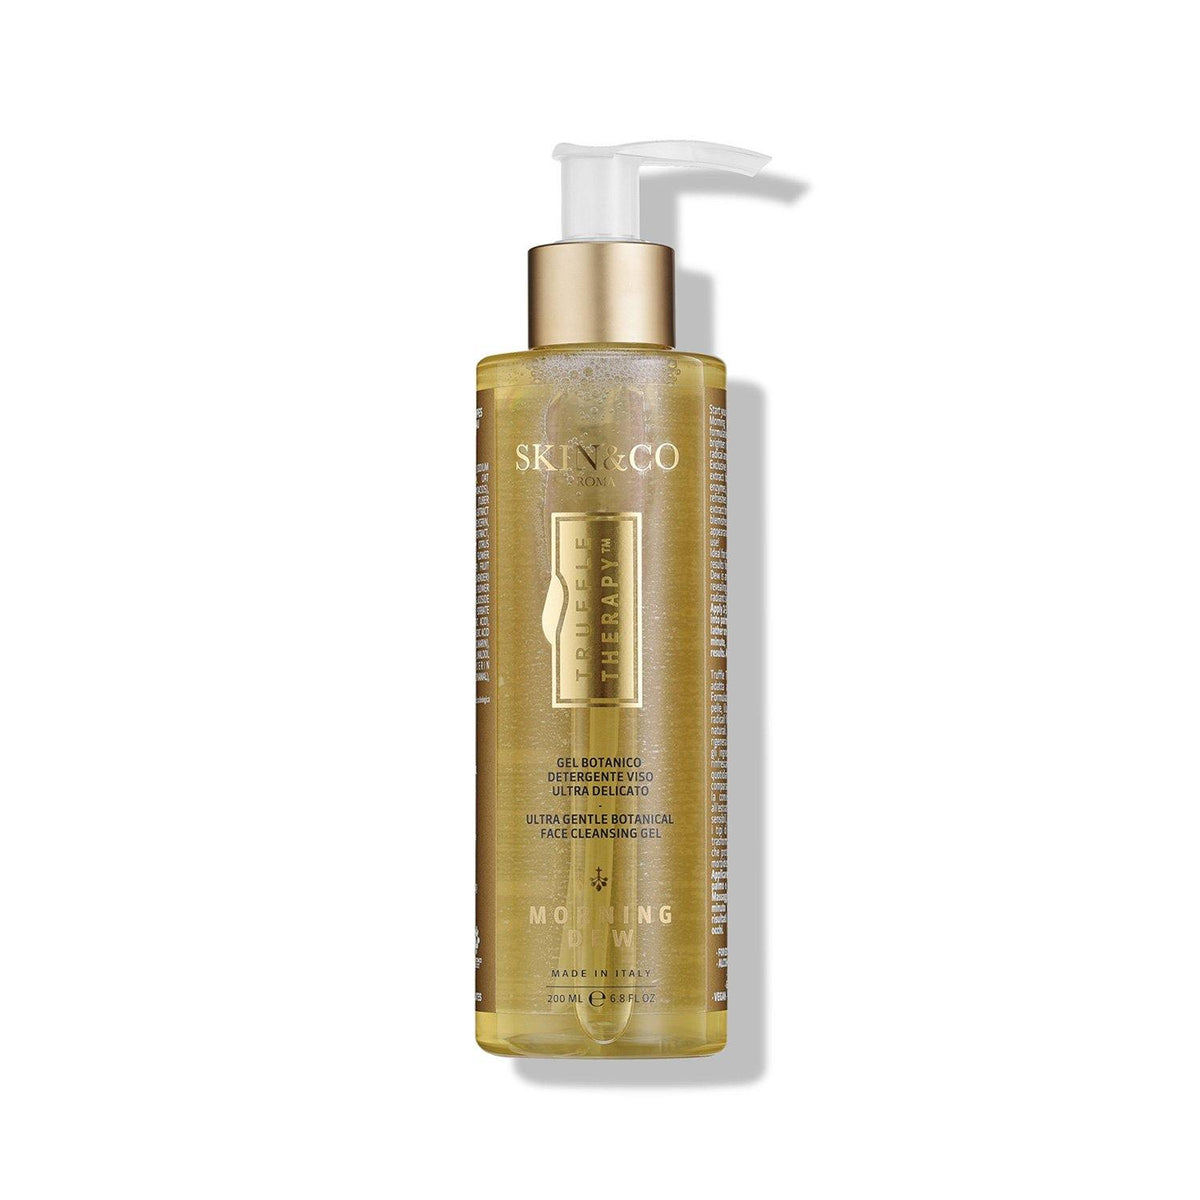 Truffle Therapy Morning Dew Cleansing Gel: Umbrian Botanical Radiance ...